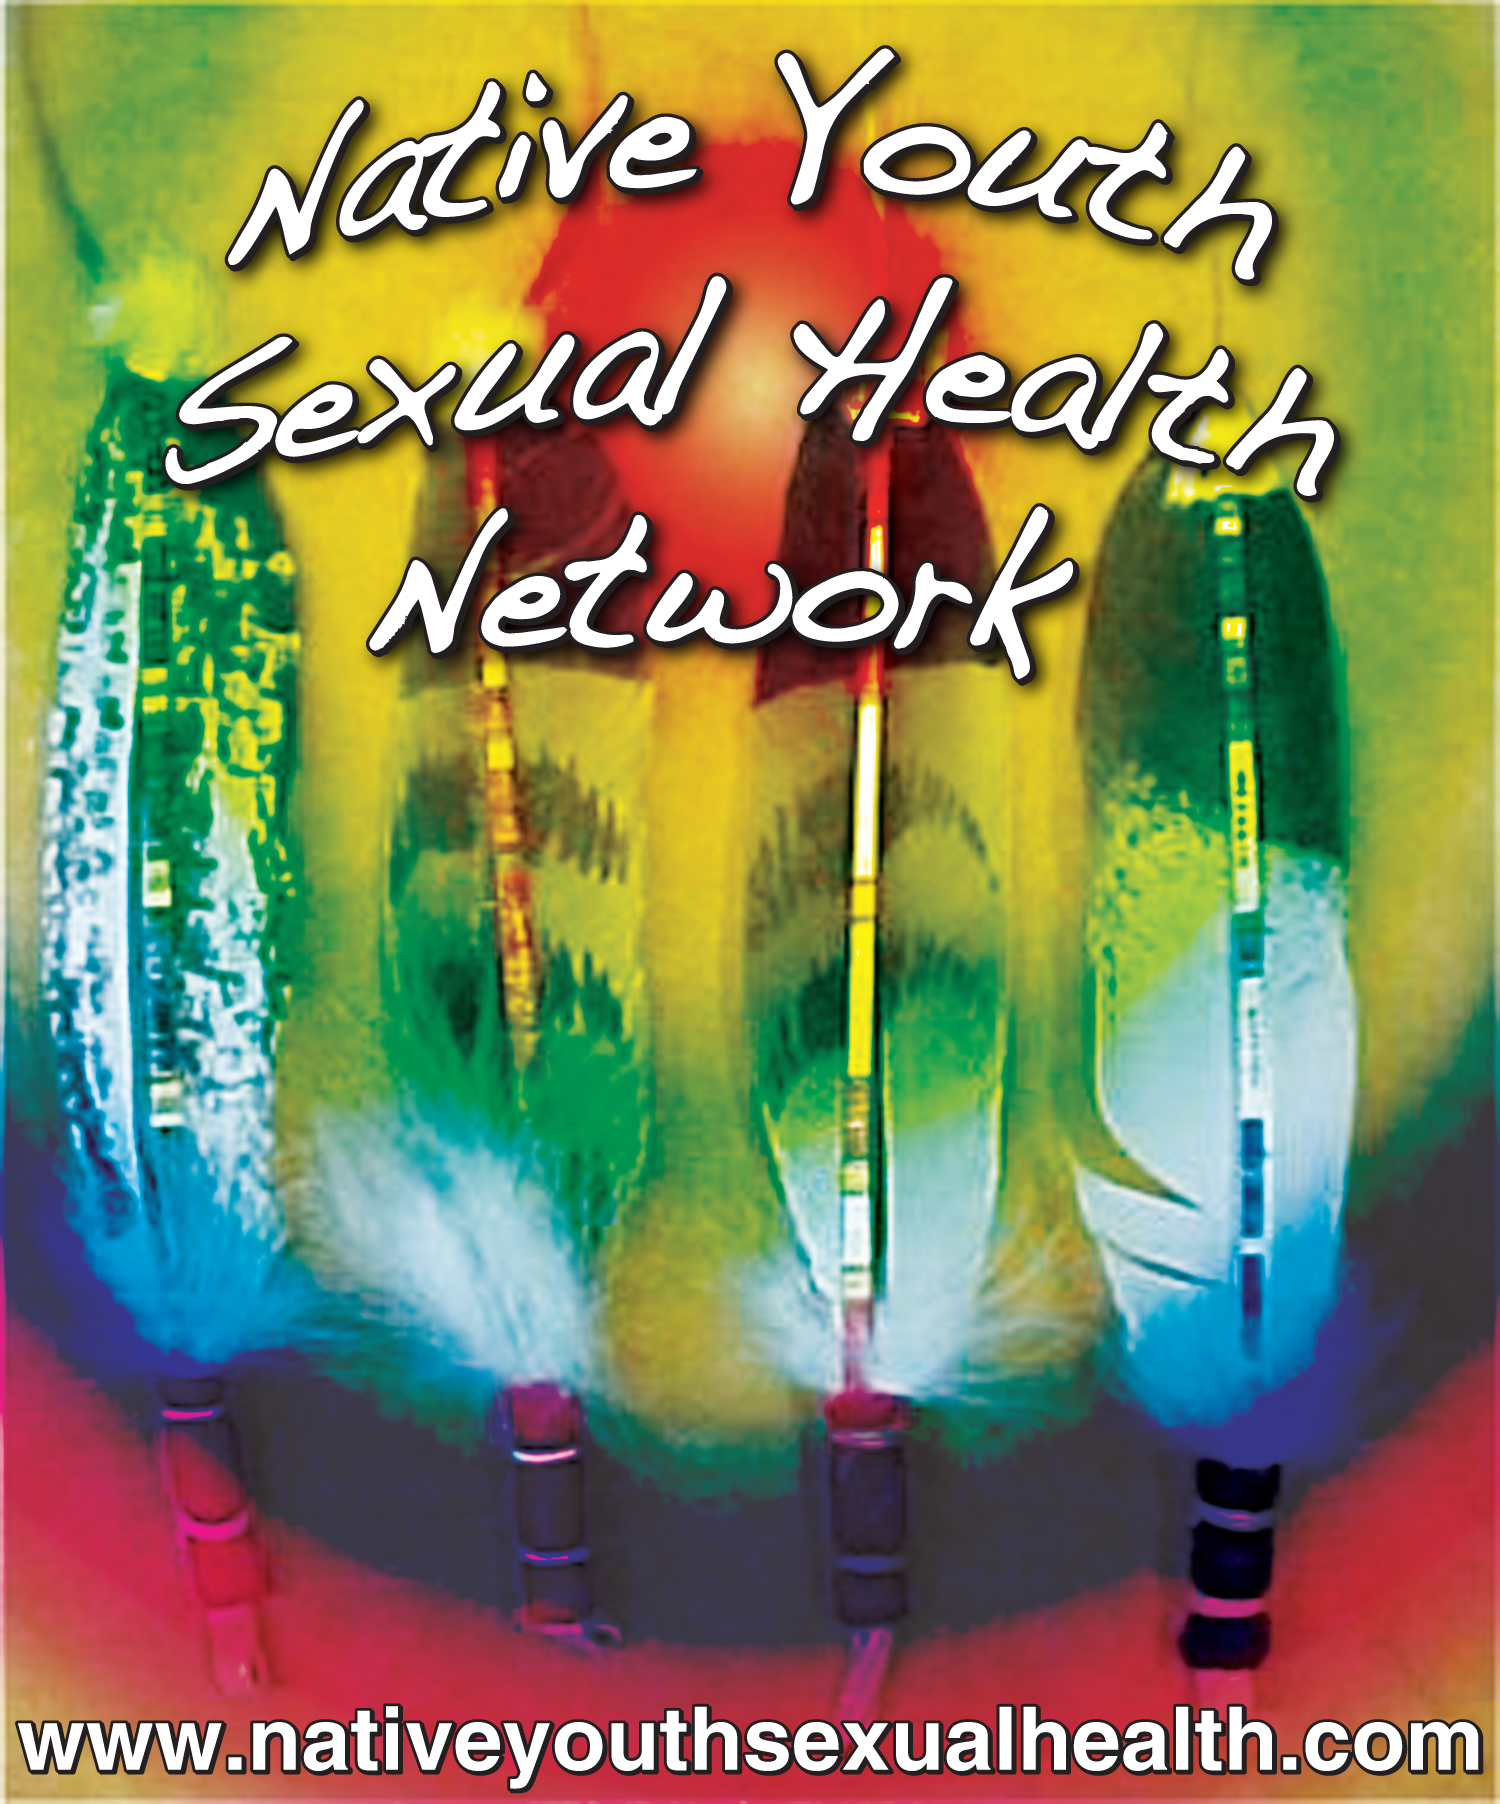 Photo credit Native Youth Sexual Health Network